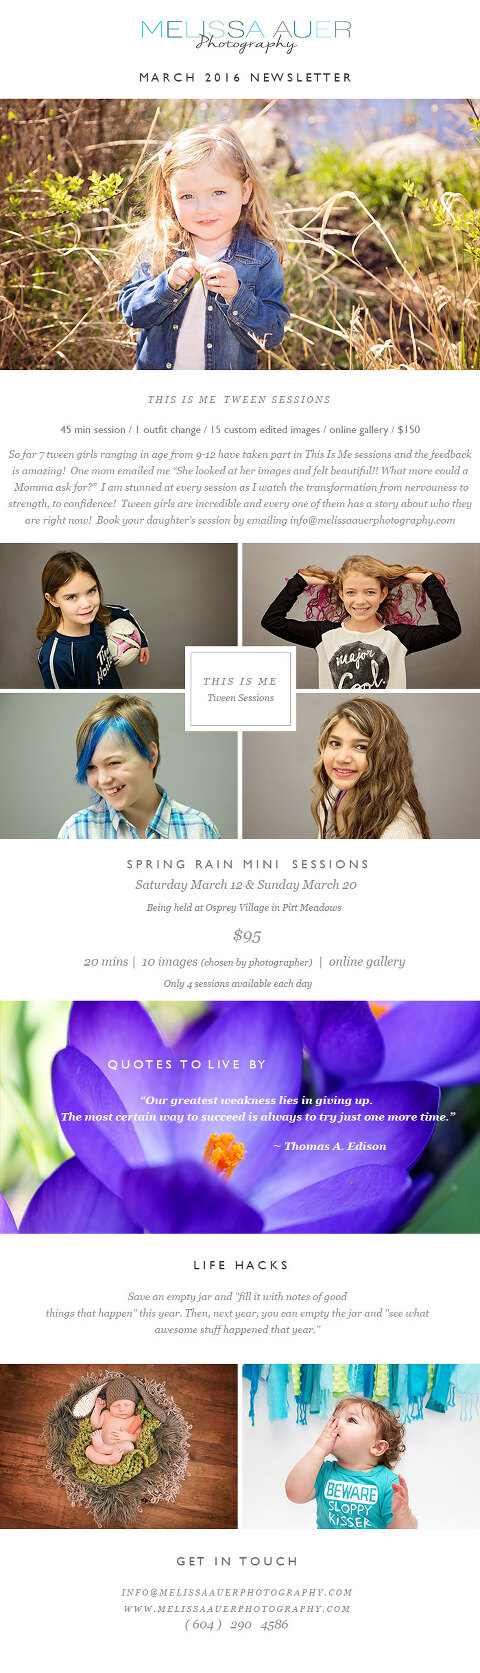 March Newsletter 2016 - Melissa Auer Photography